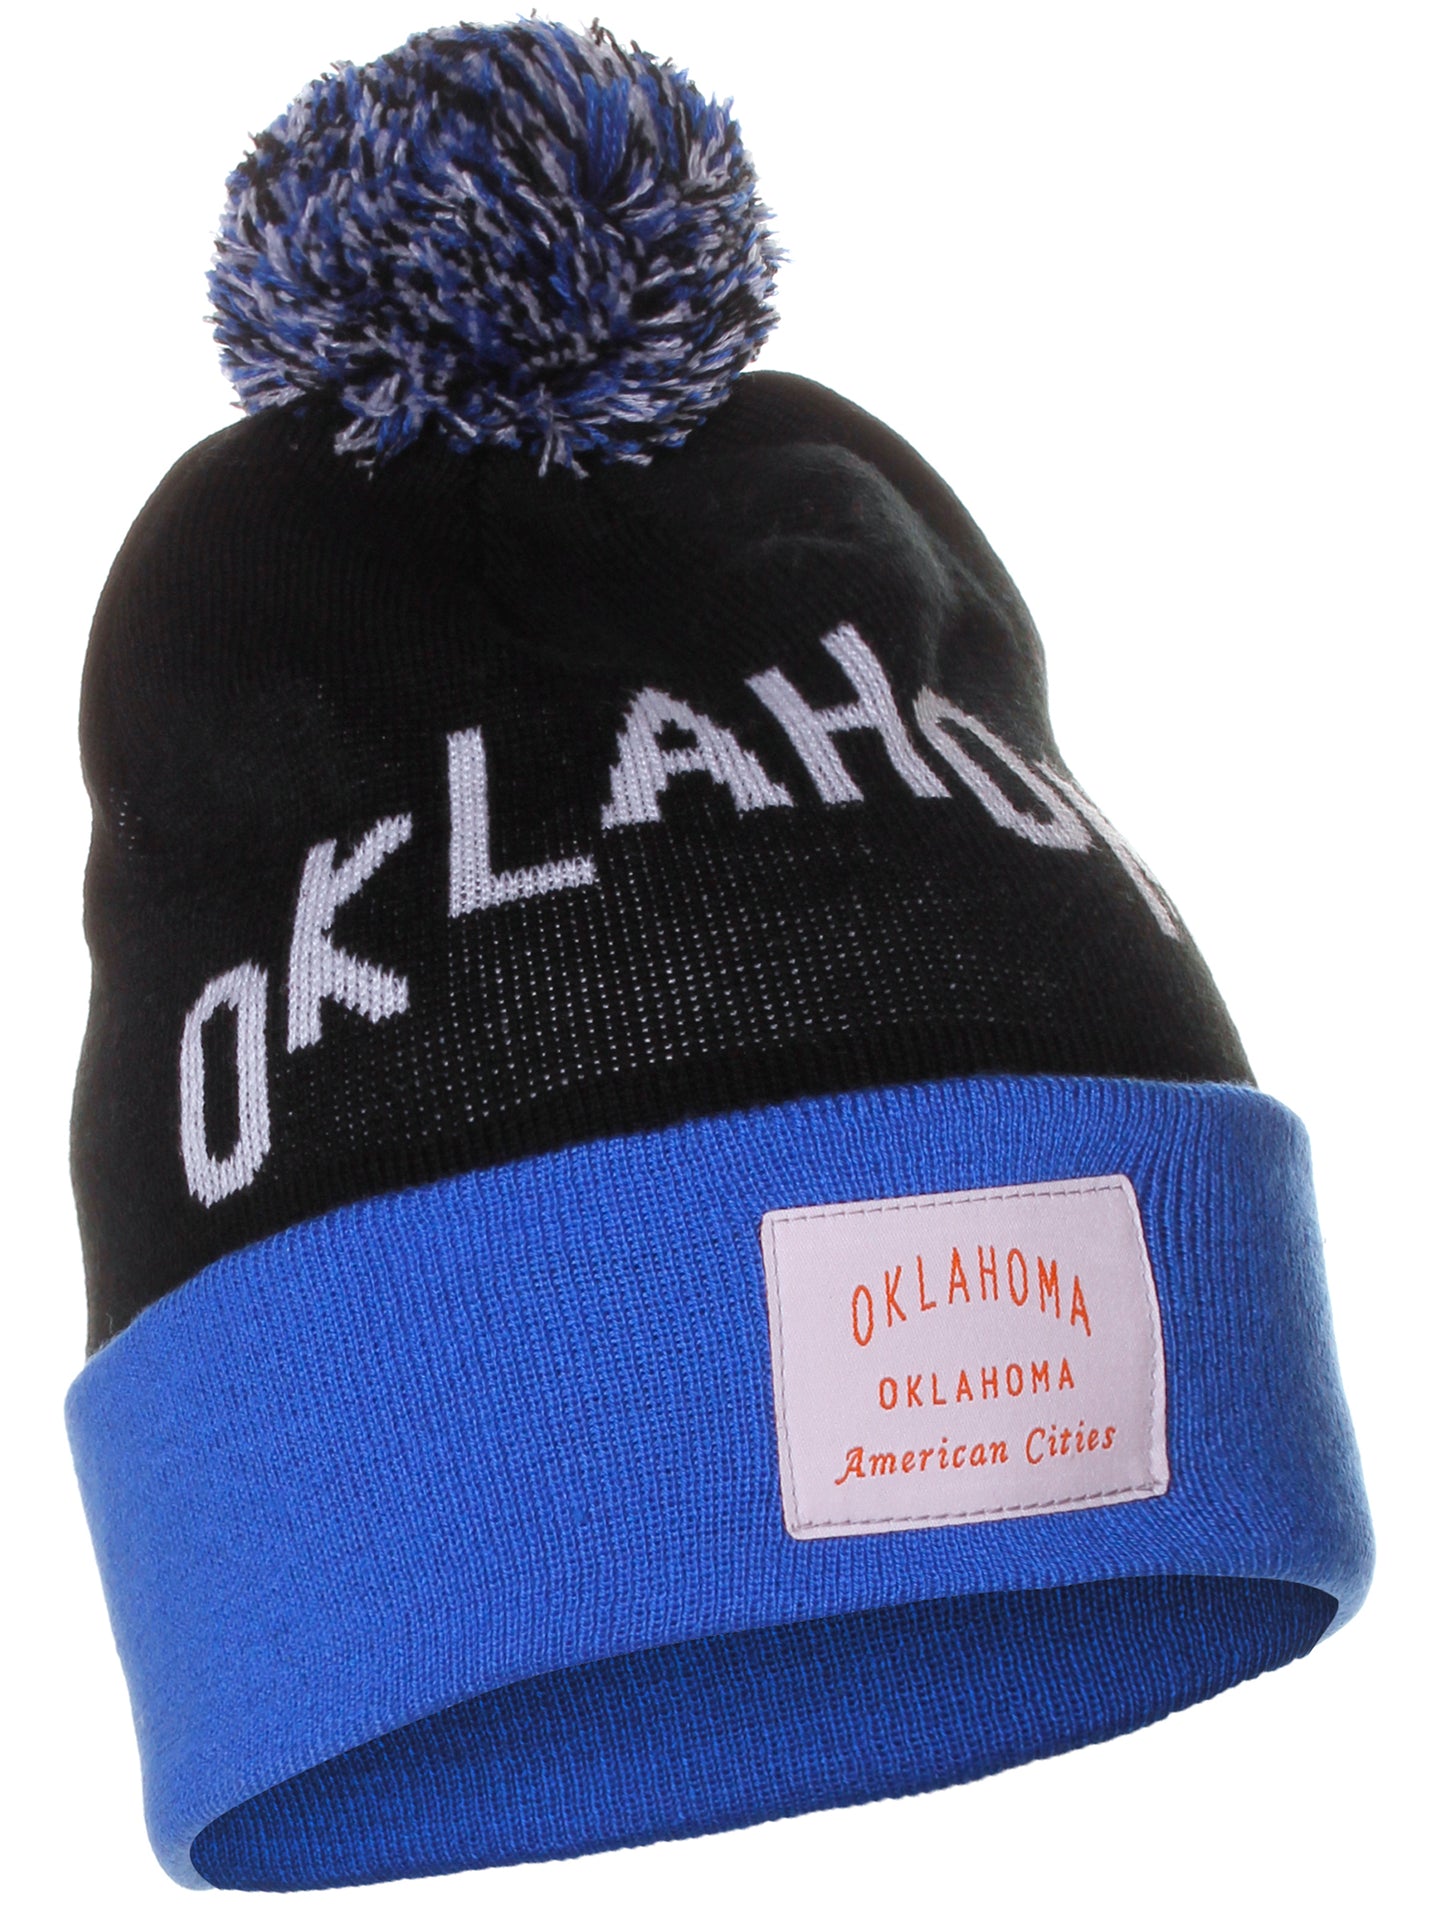 American Cities Oklahoma Arch Letters Pom Pom Knit Hat Cap Beanie